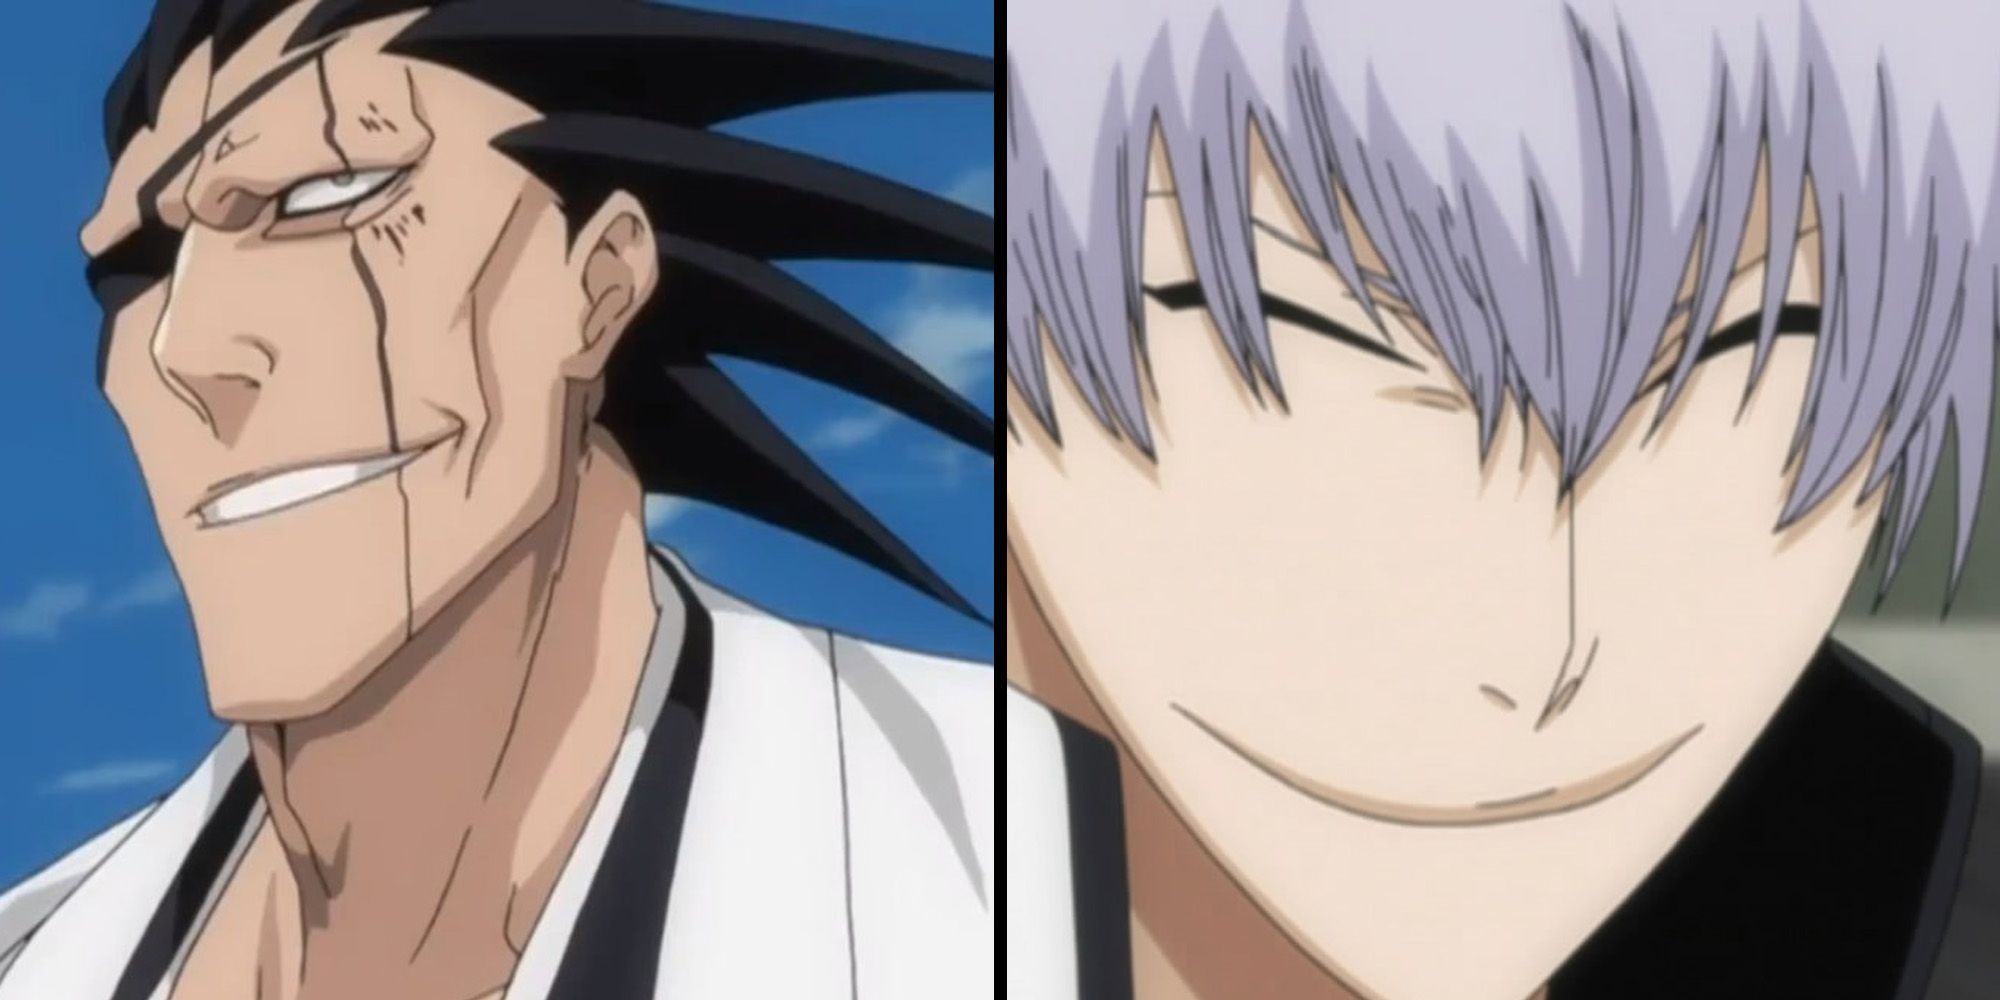 Characters appearing in Bleach Anime